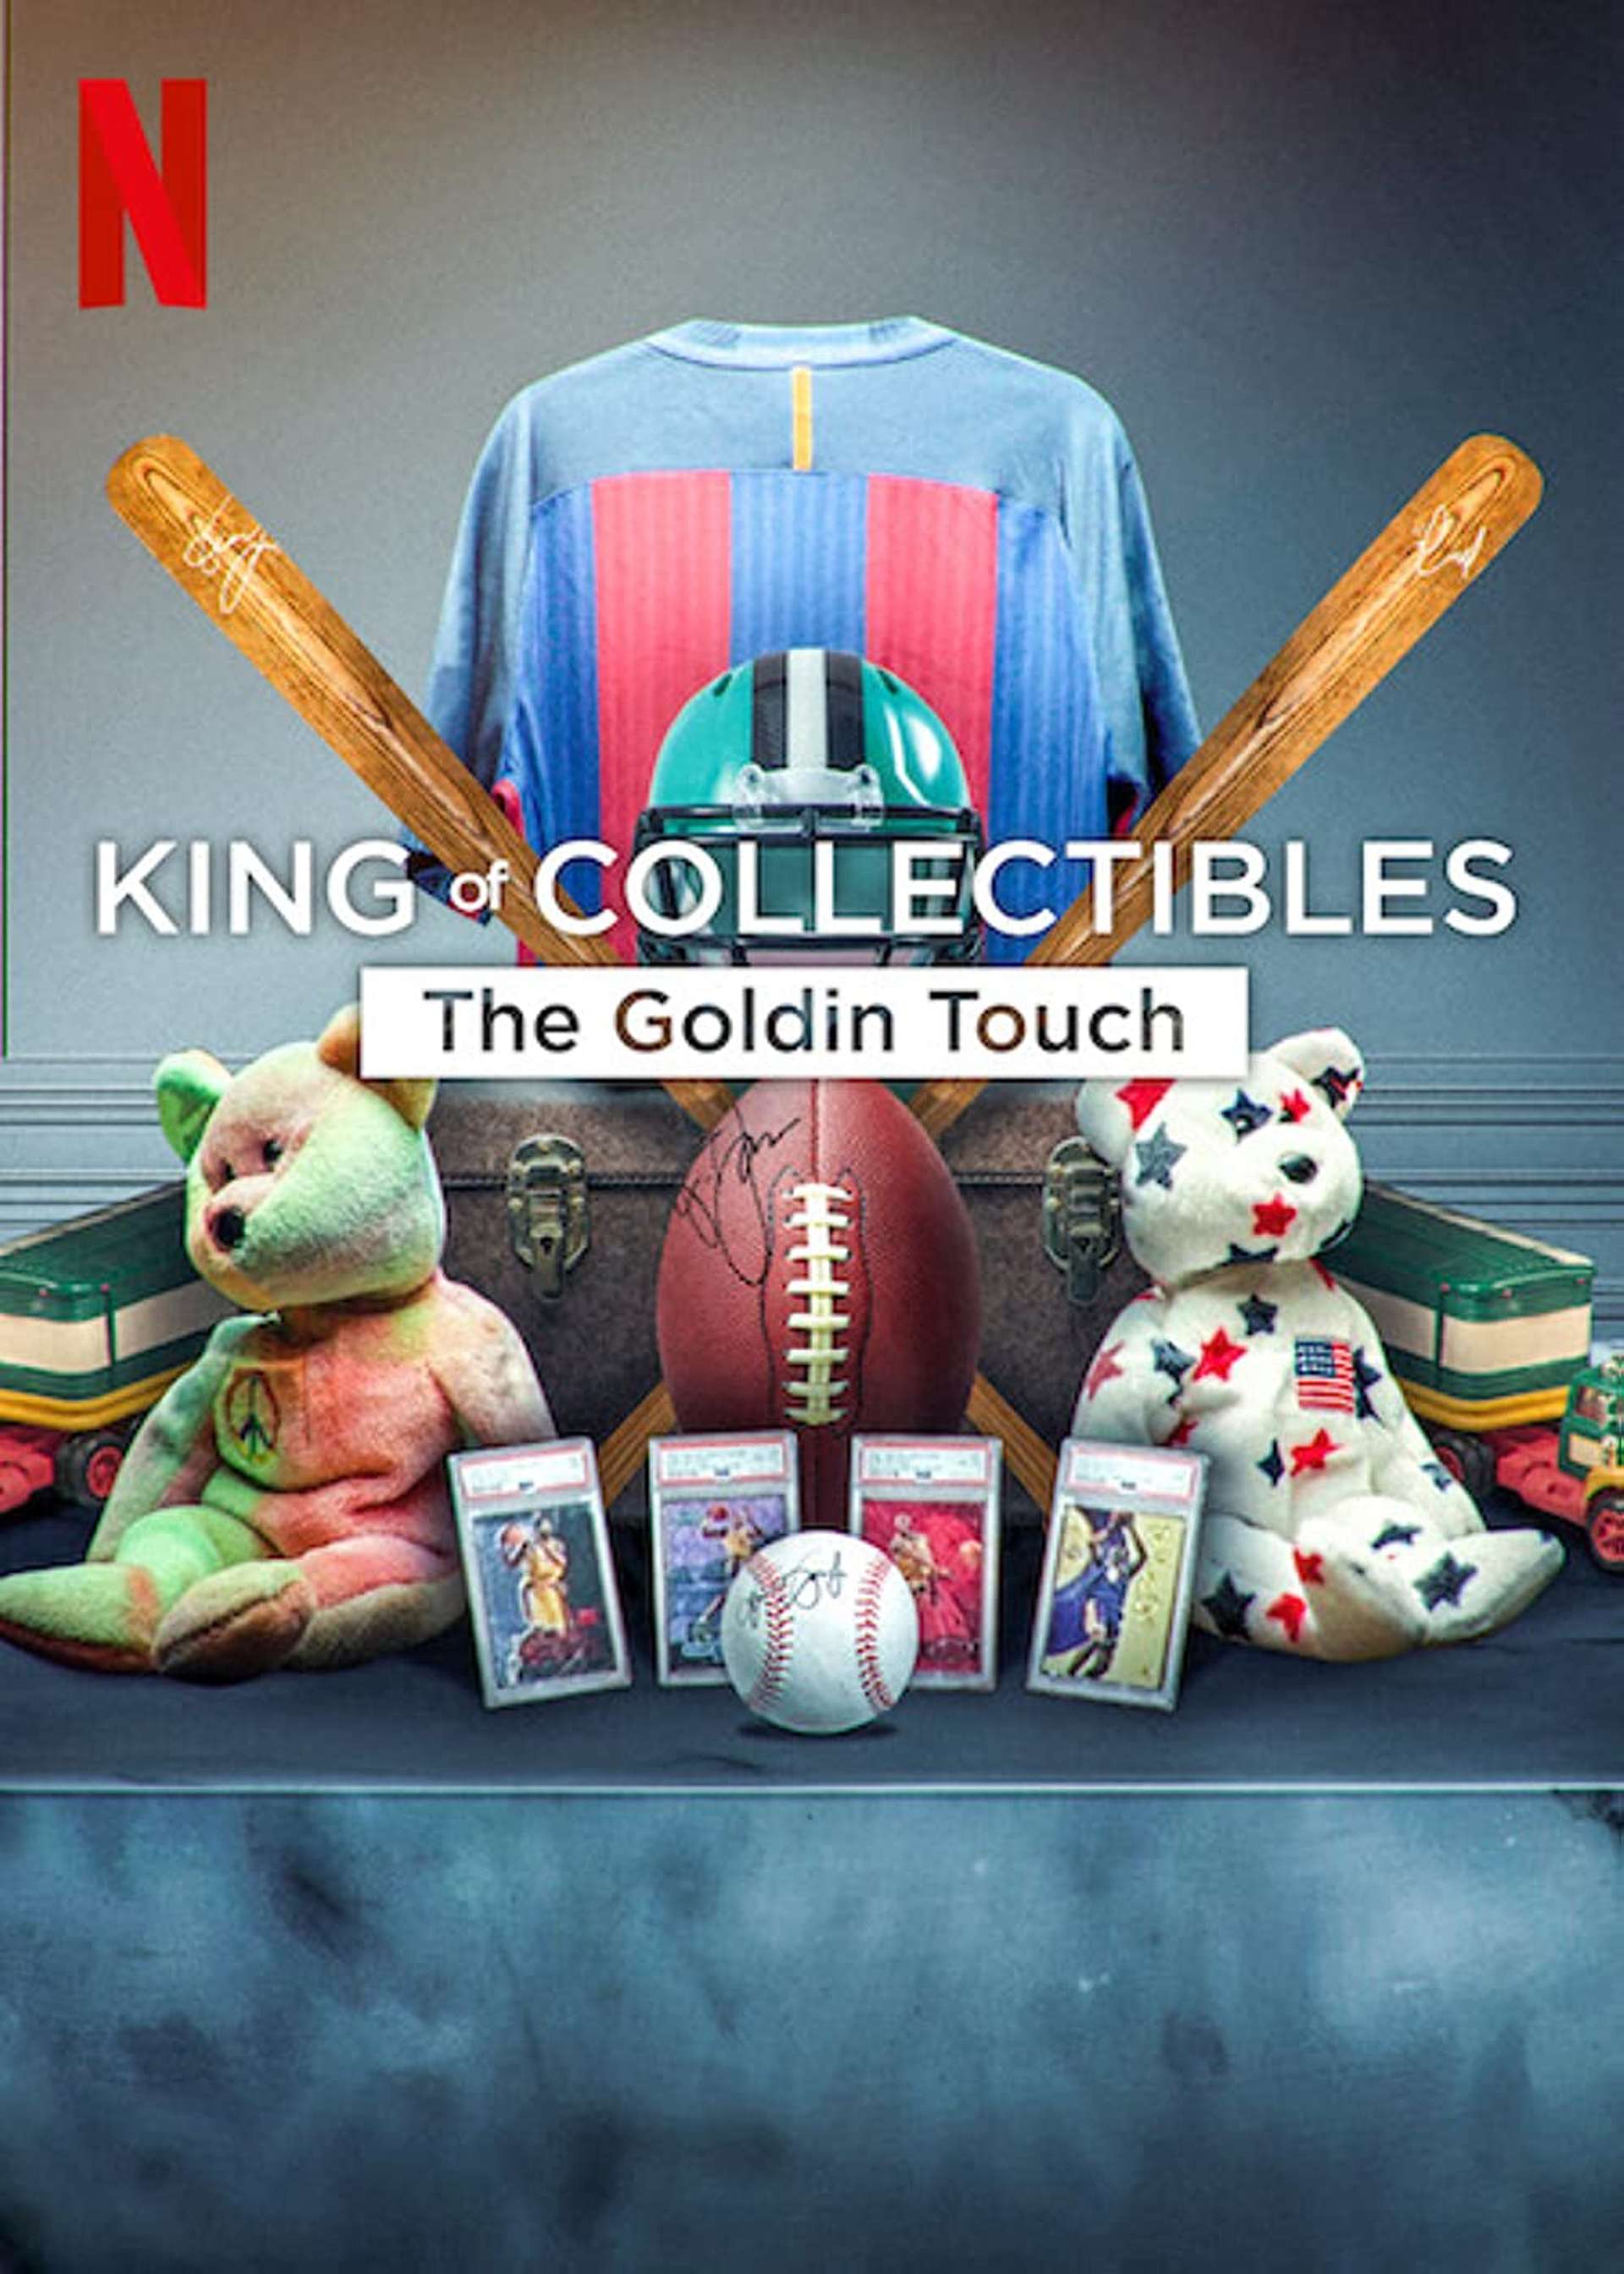 An image of the poster of King of Collectibles by Netflix. It shows a pile of collectibles, including teddy bears, a signed American football and baseball bats, trading cards and a jersey.